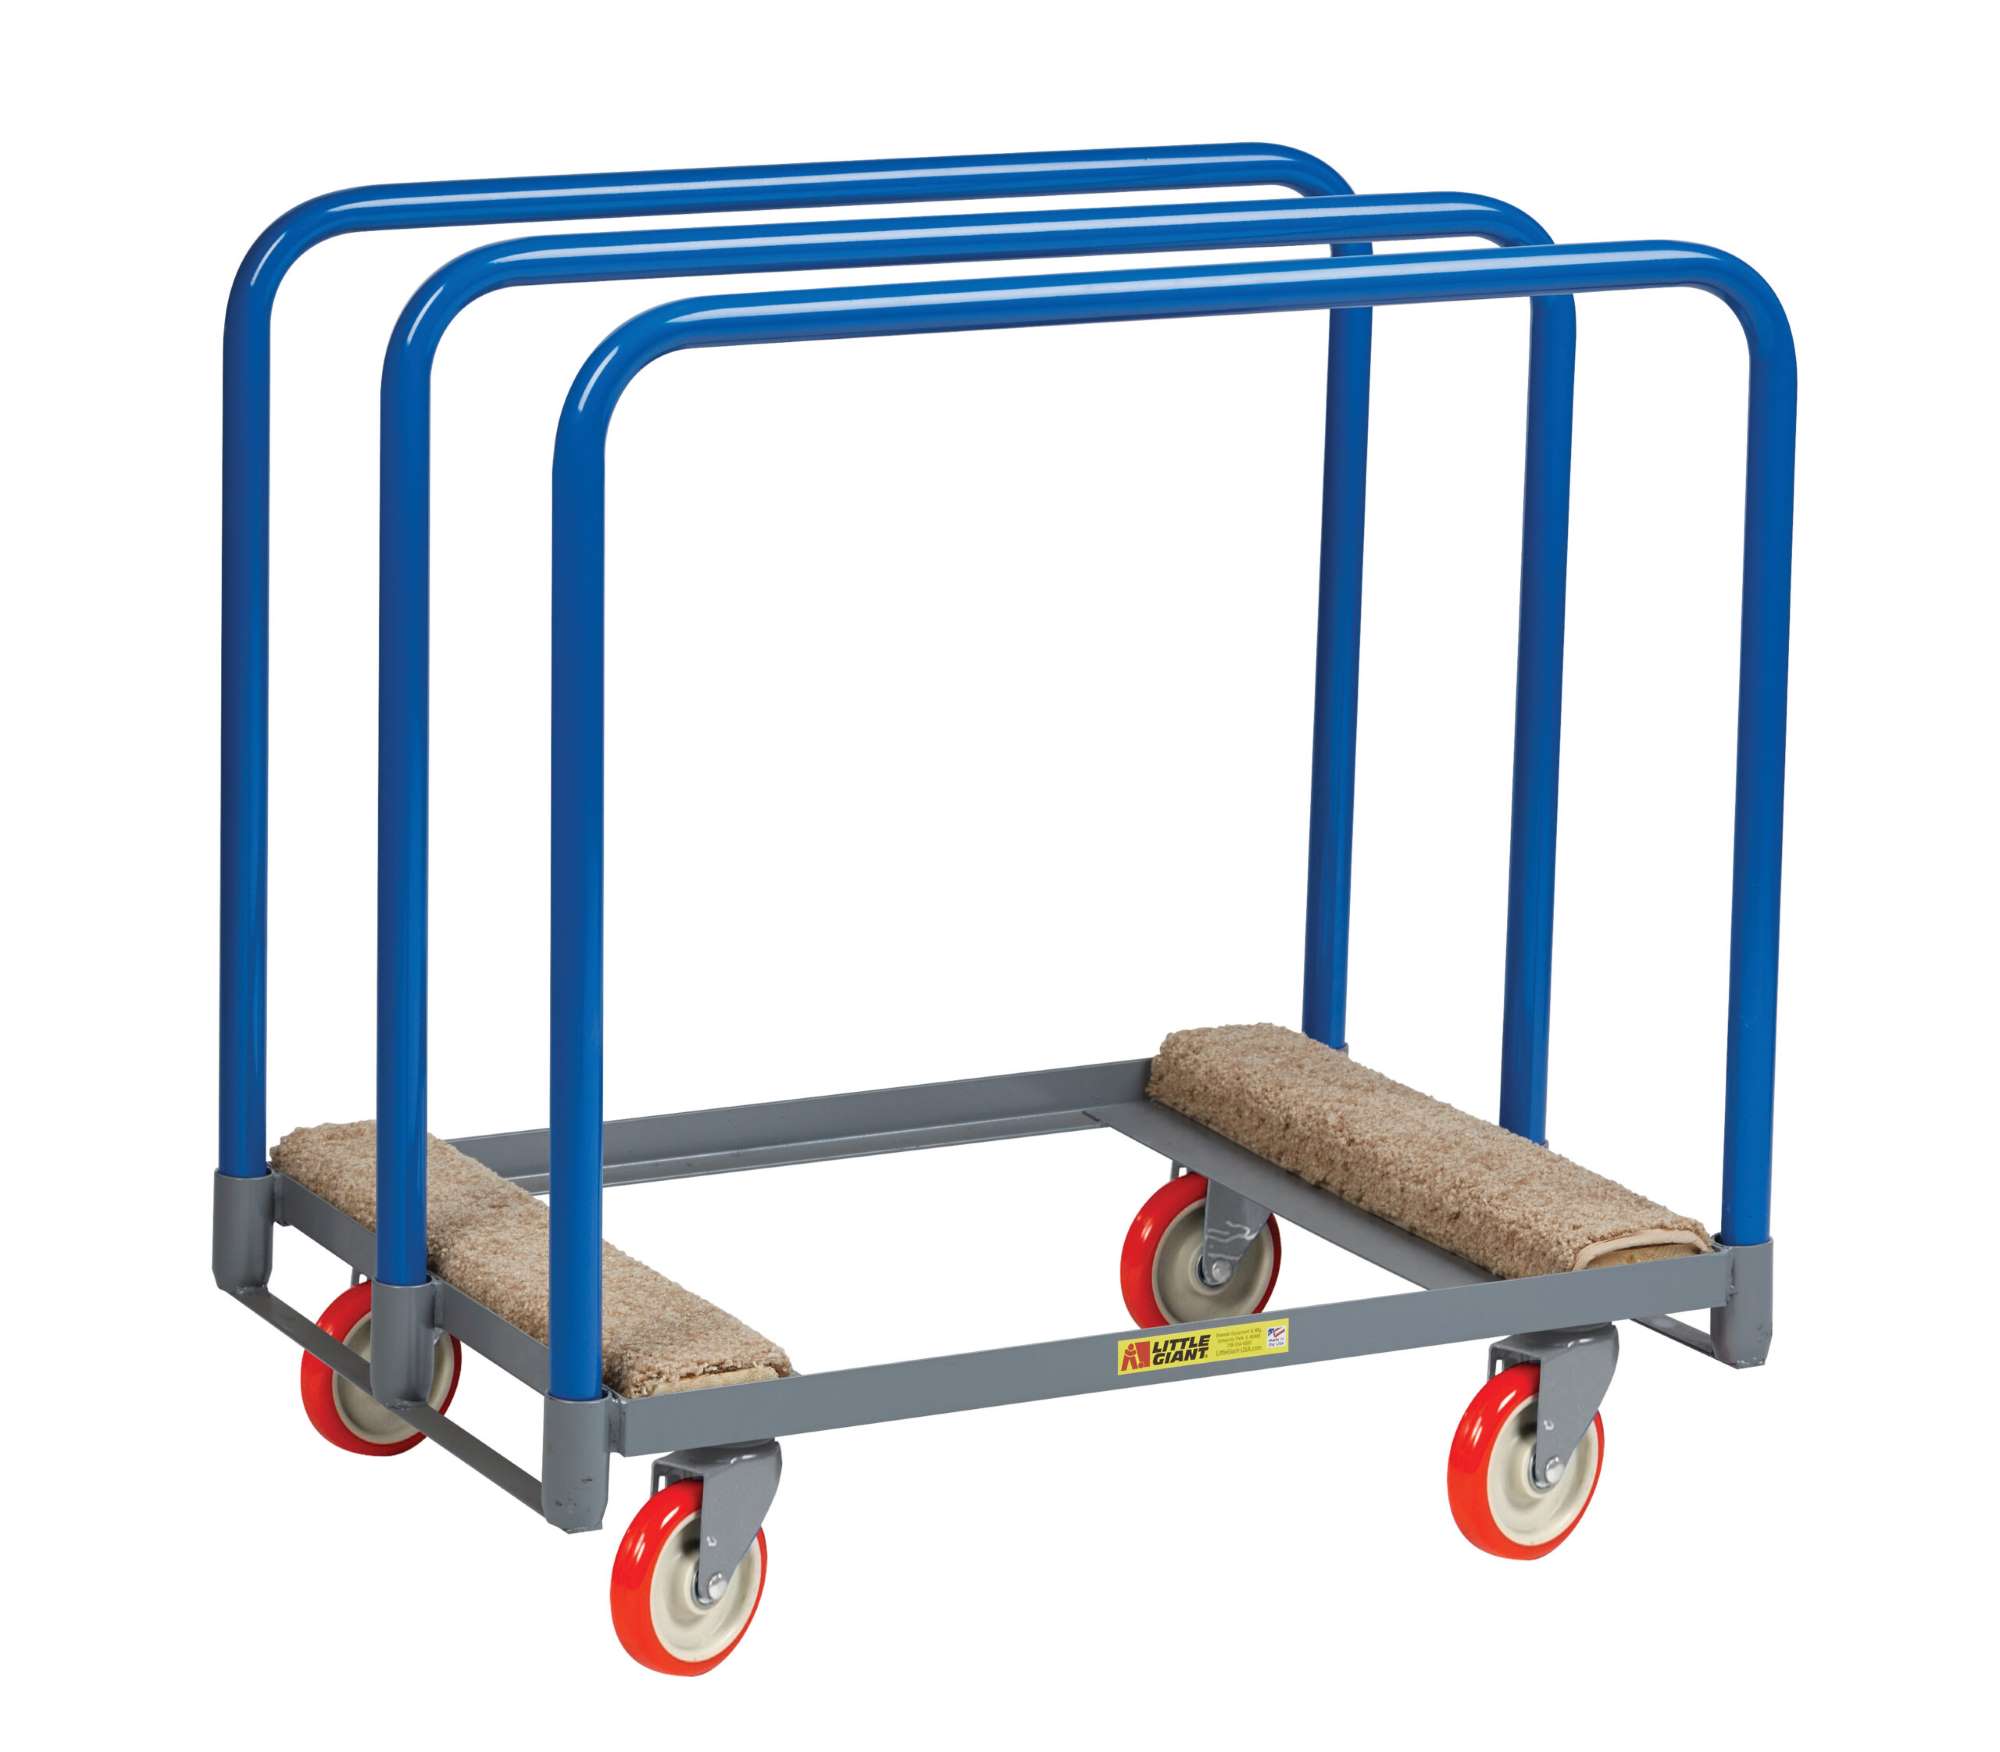 Little Giant panel truck, 1000 lbs capacity, 3 removable panel supports, 27" tall uprights, 9-1/2" between uprights, 4 swivel casters, 5" wheels, Available with wood or carpet covered